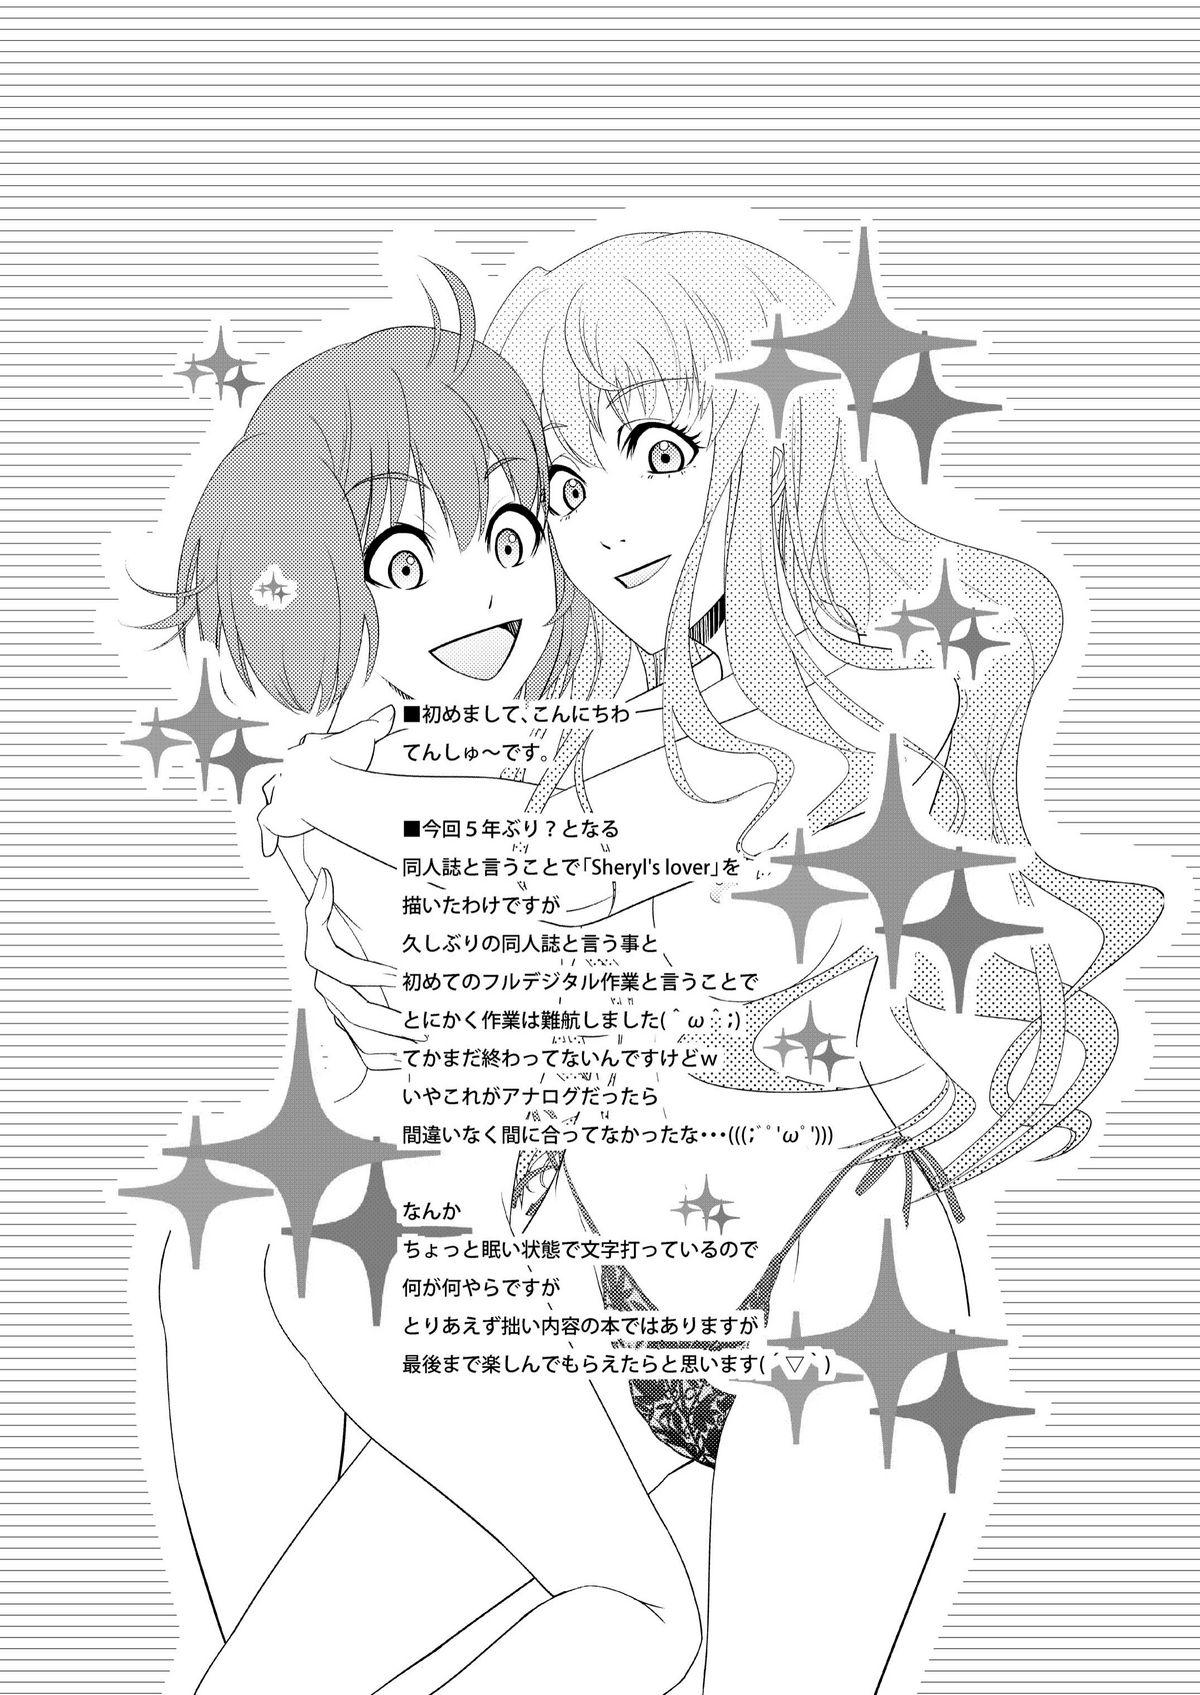 Follada Sheryl's lover - Macross frontier Group - Page 4